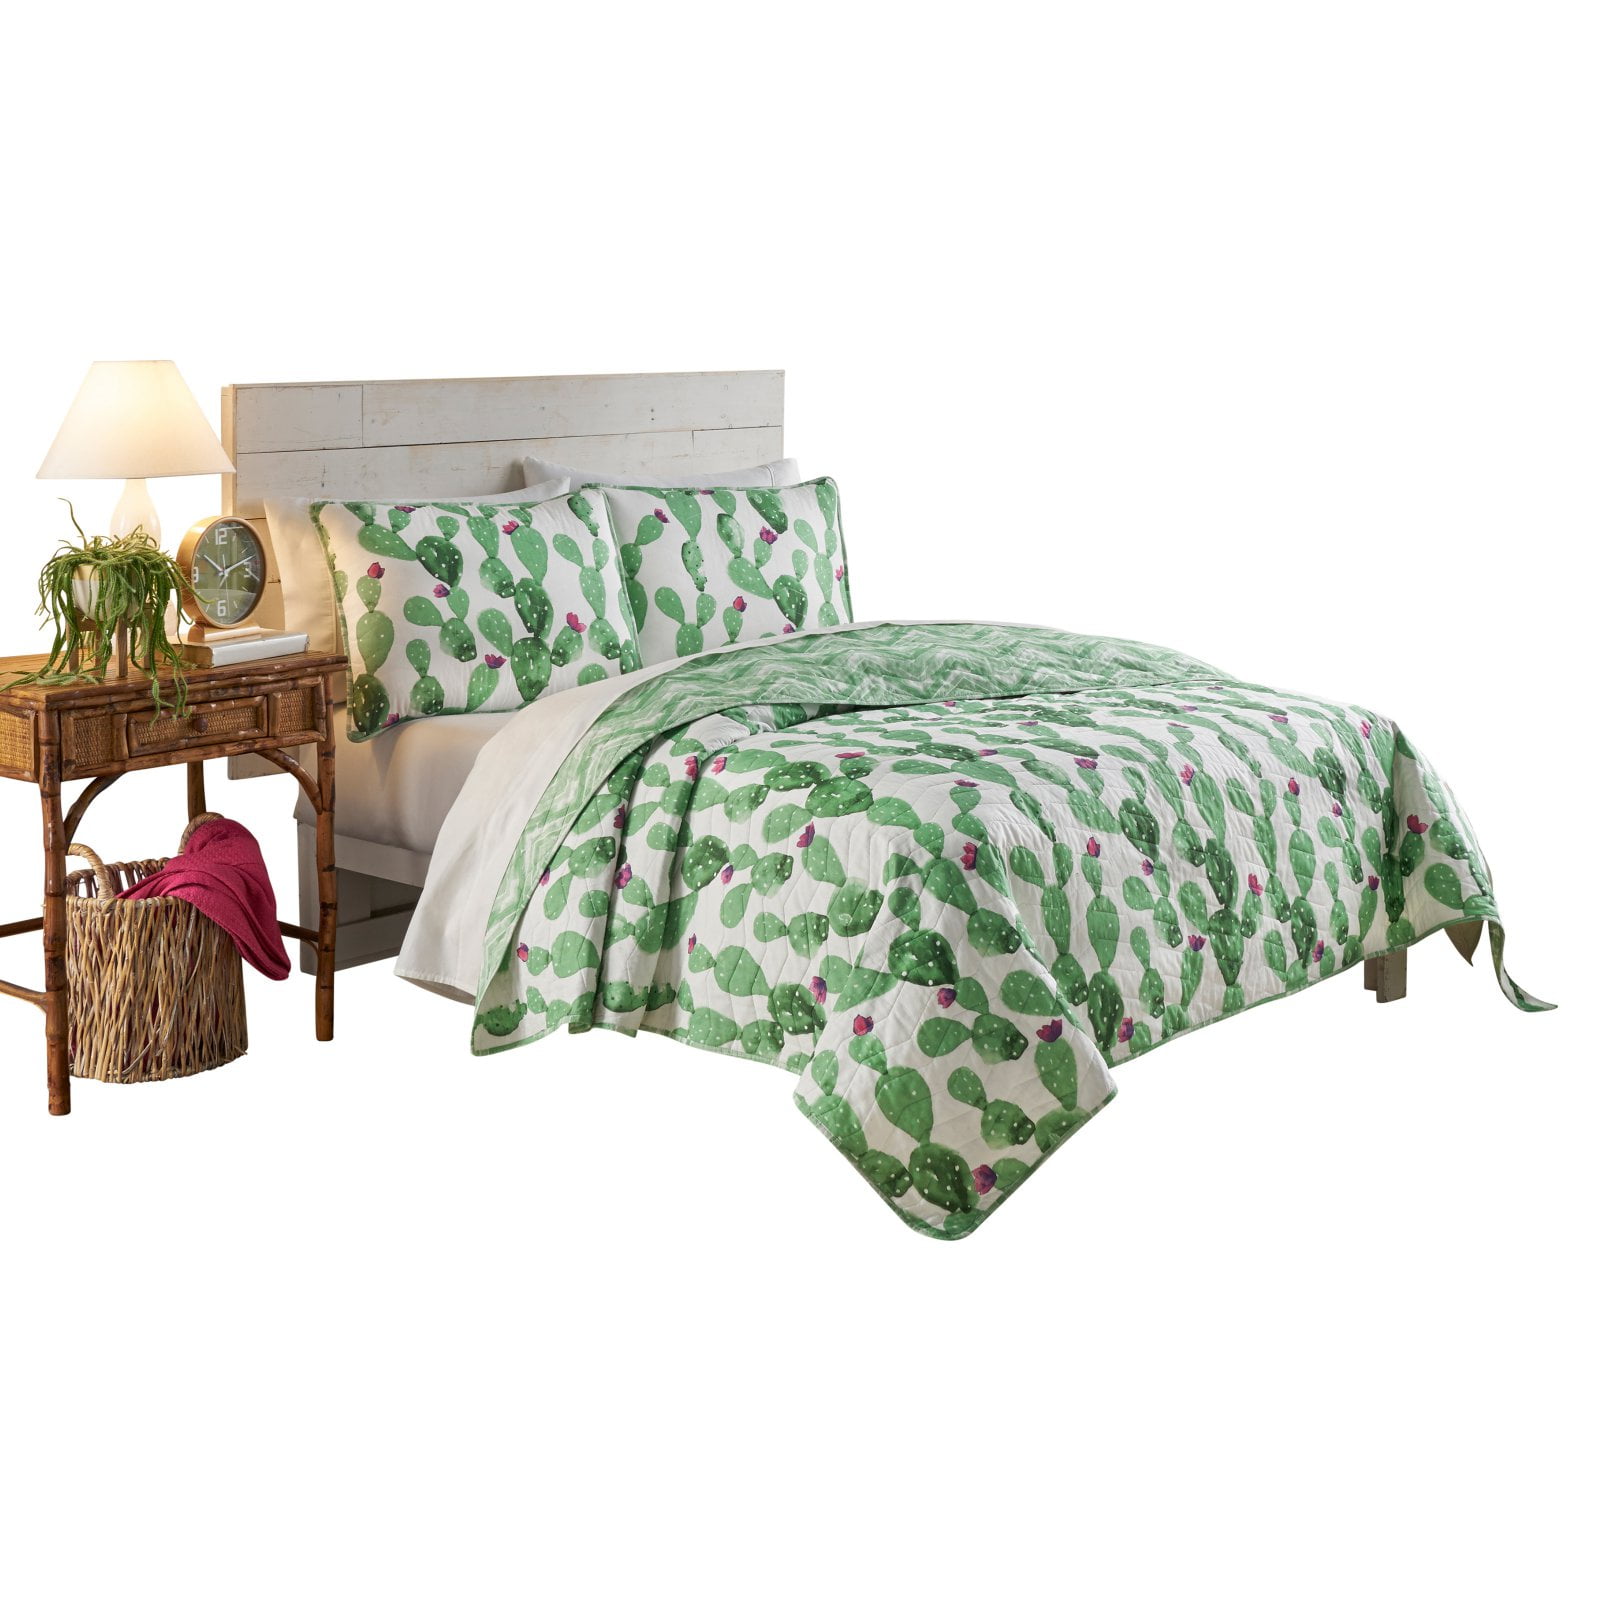 Details about   Cactus Quilted Bedspread & Pillow Shams Set Vertical Lines Flowers Print 